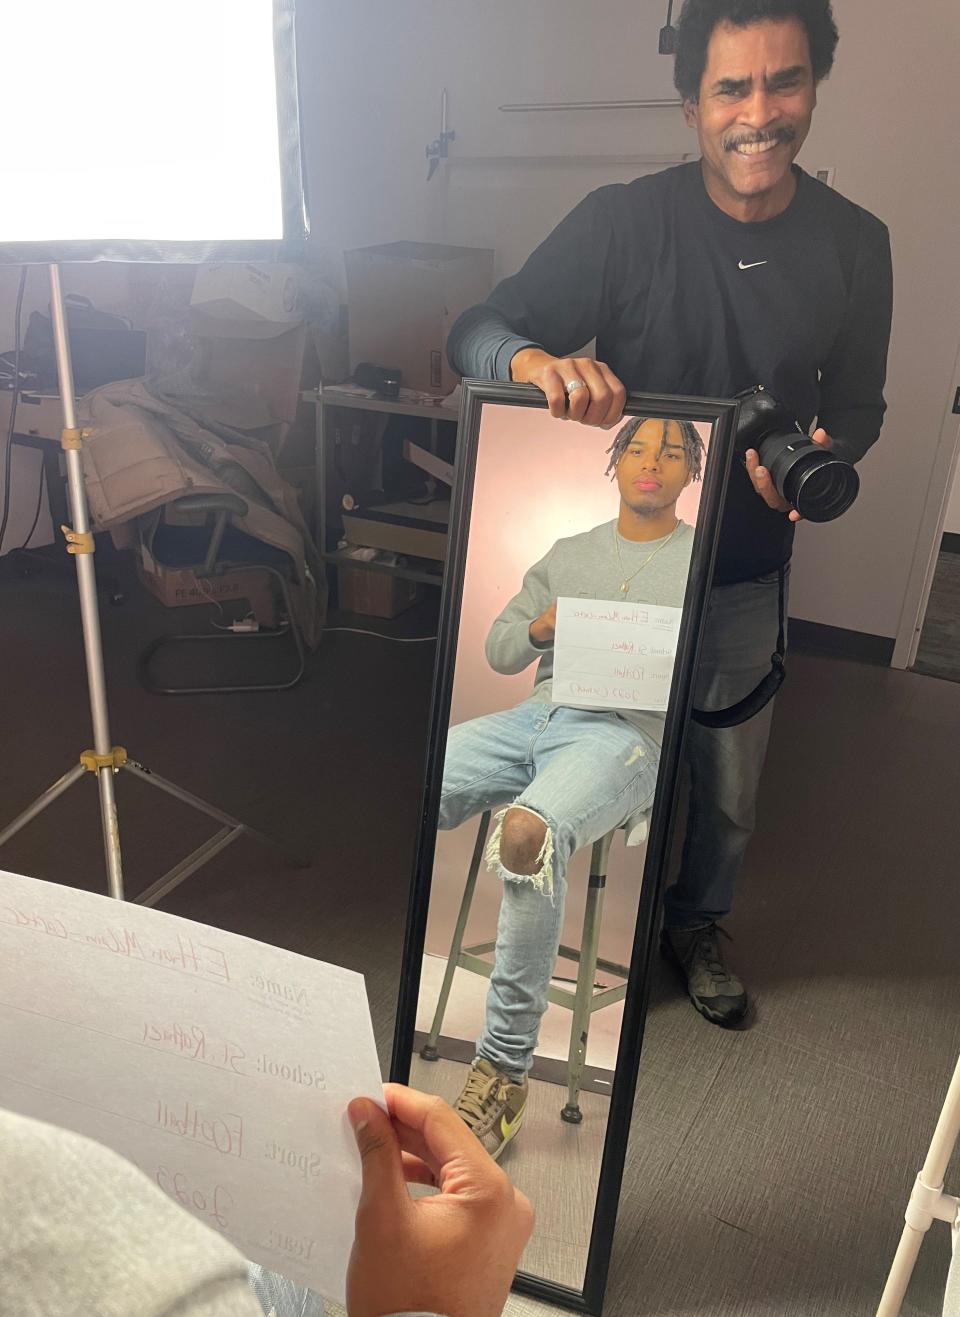 Providence Journal photographer Kris Craig holds a mirror up for St. Raphael football star Ethan McCann-Carter as part of a Journal All-States photo shoot in the Fountain Street studio.